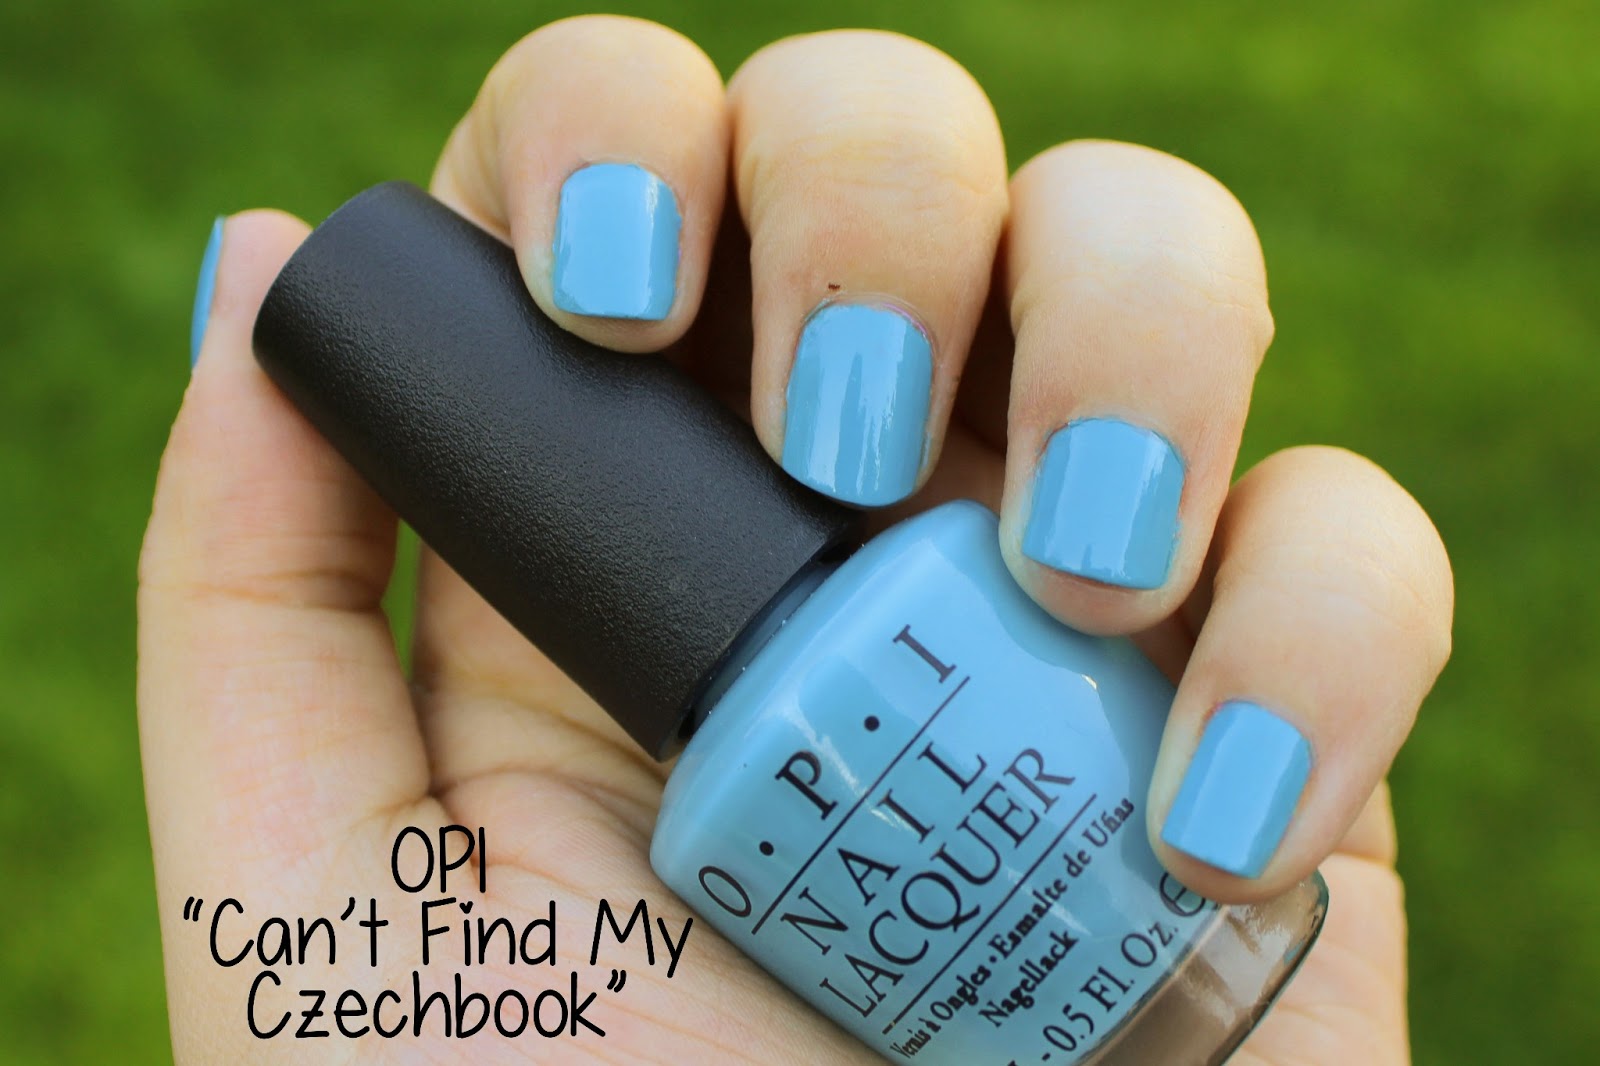 4. OPI Nail Lacquer in "Can't Find My Czechbook" - wide 2